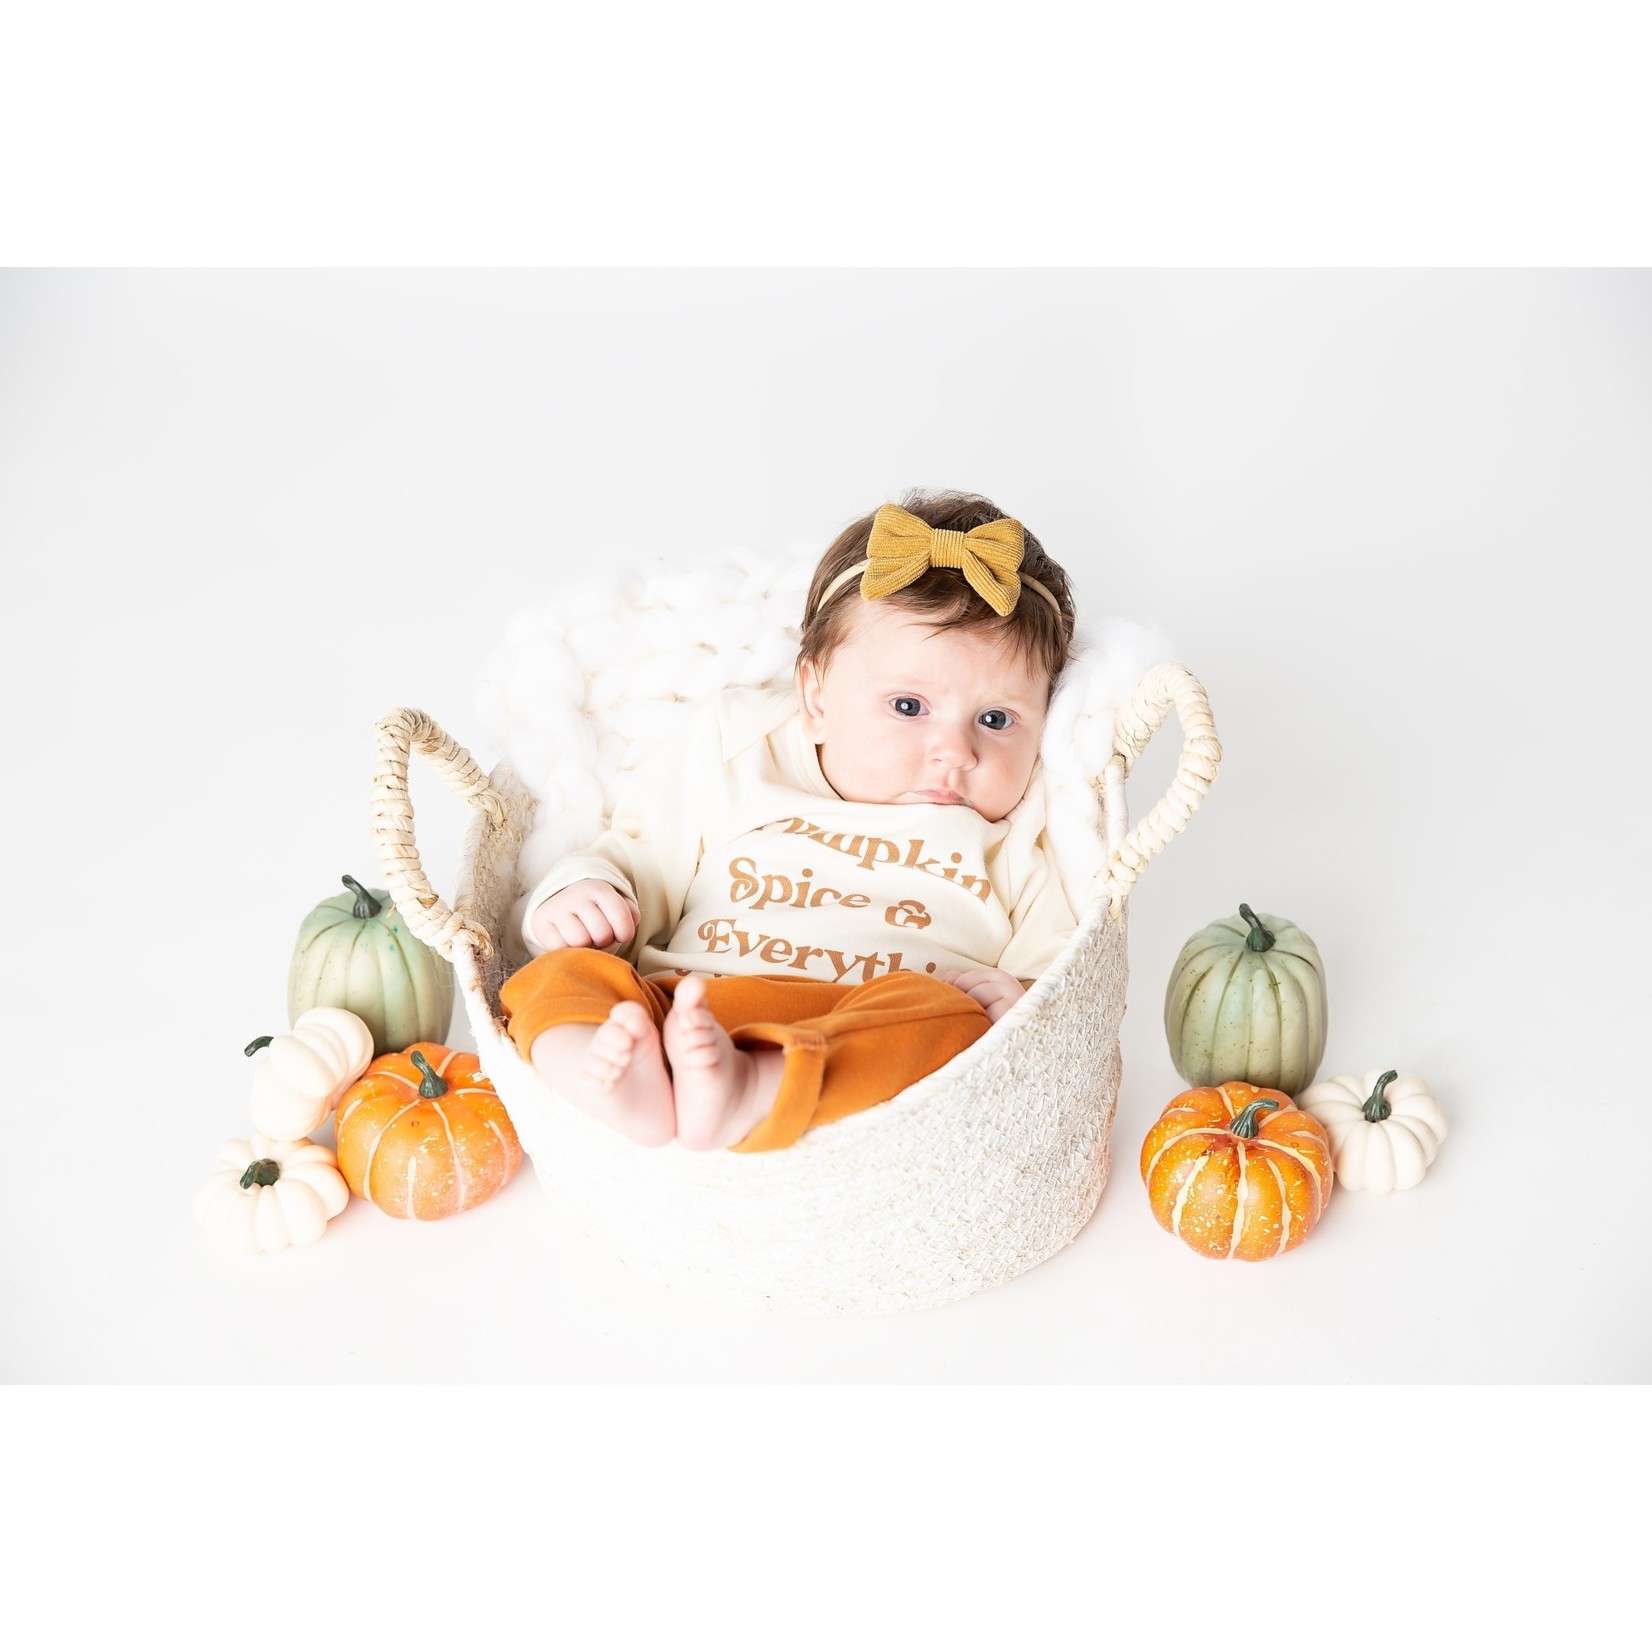 Emerson and Friends Pumpkin Spice Long Sleeve Baby Onesie